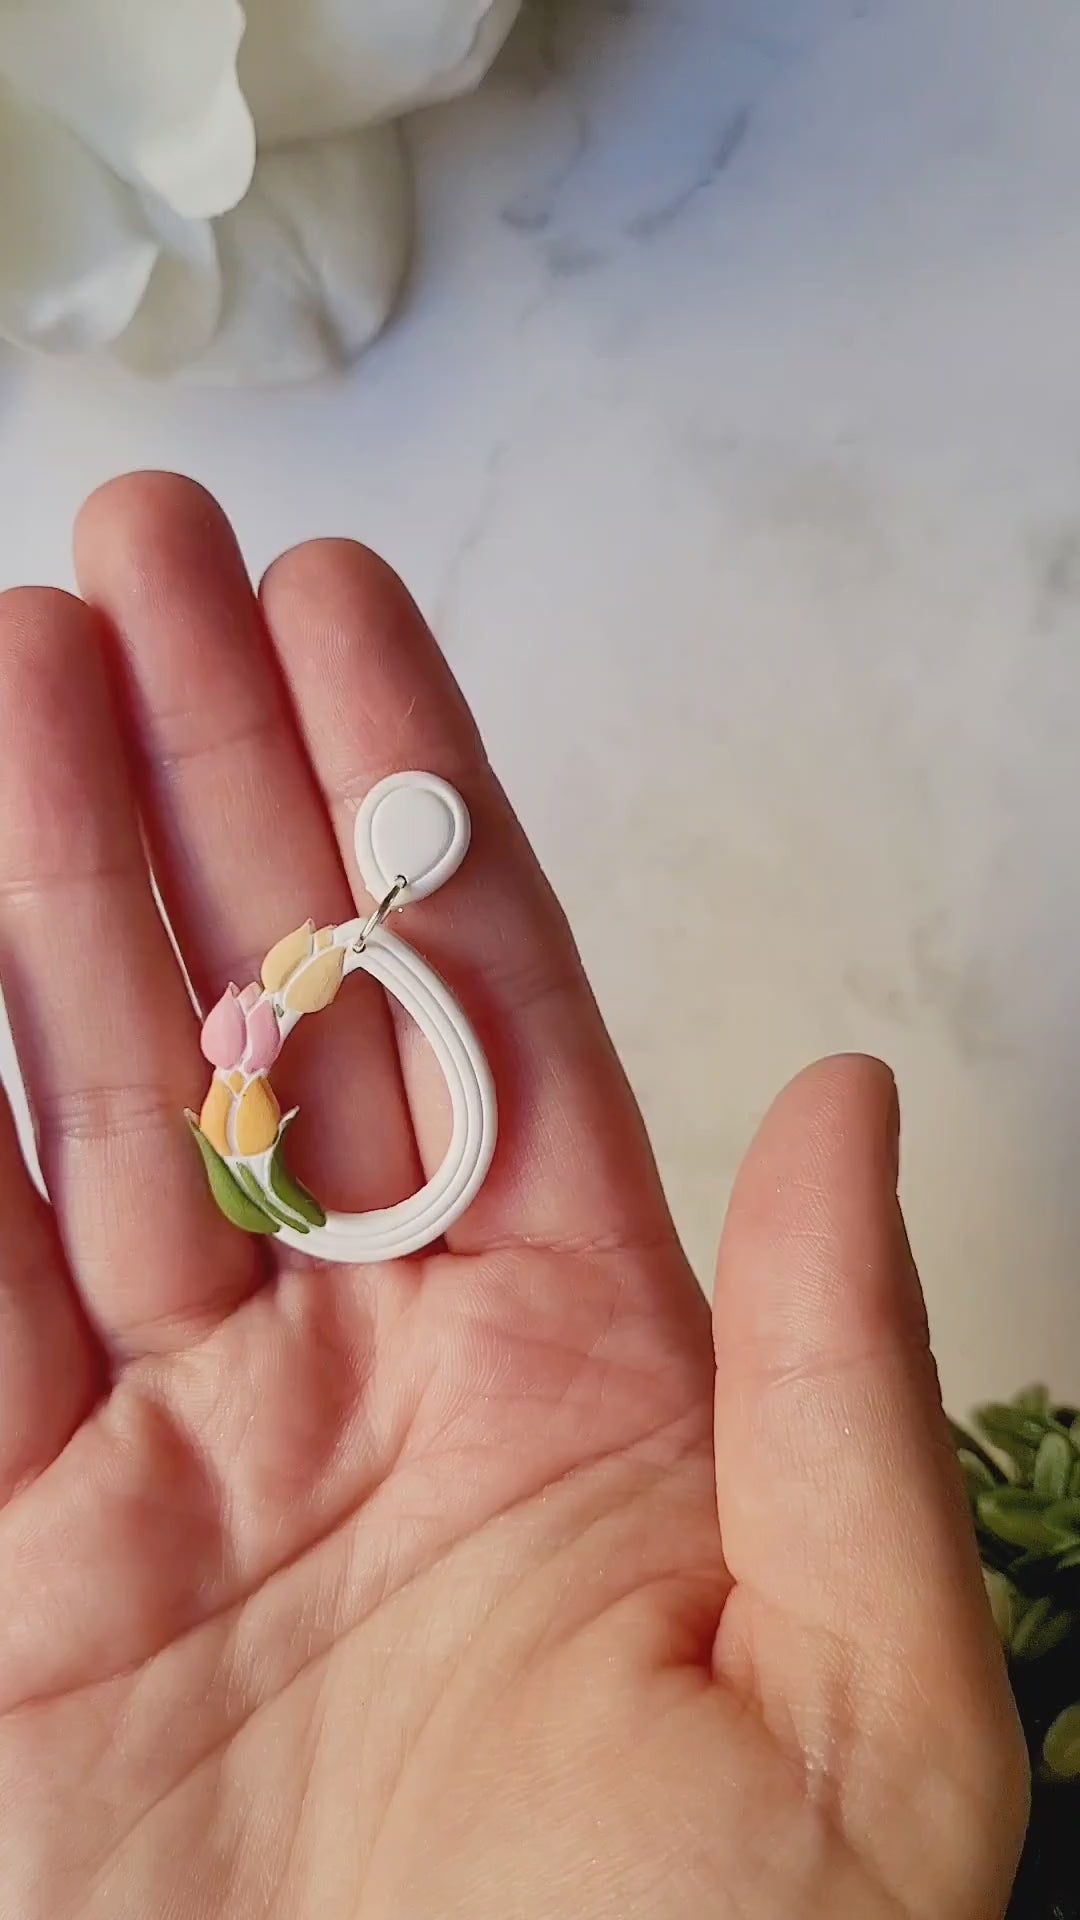 video close up of white teardrop hoops with painted tulips on a marble background with foliage.